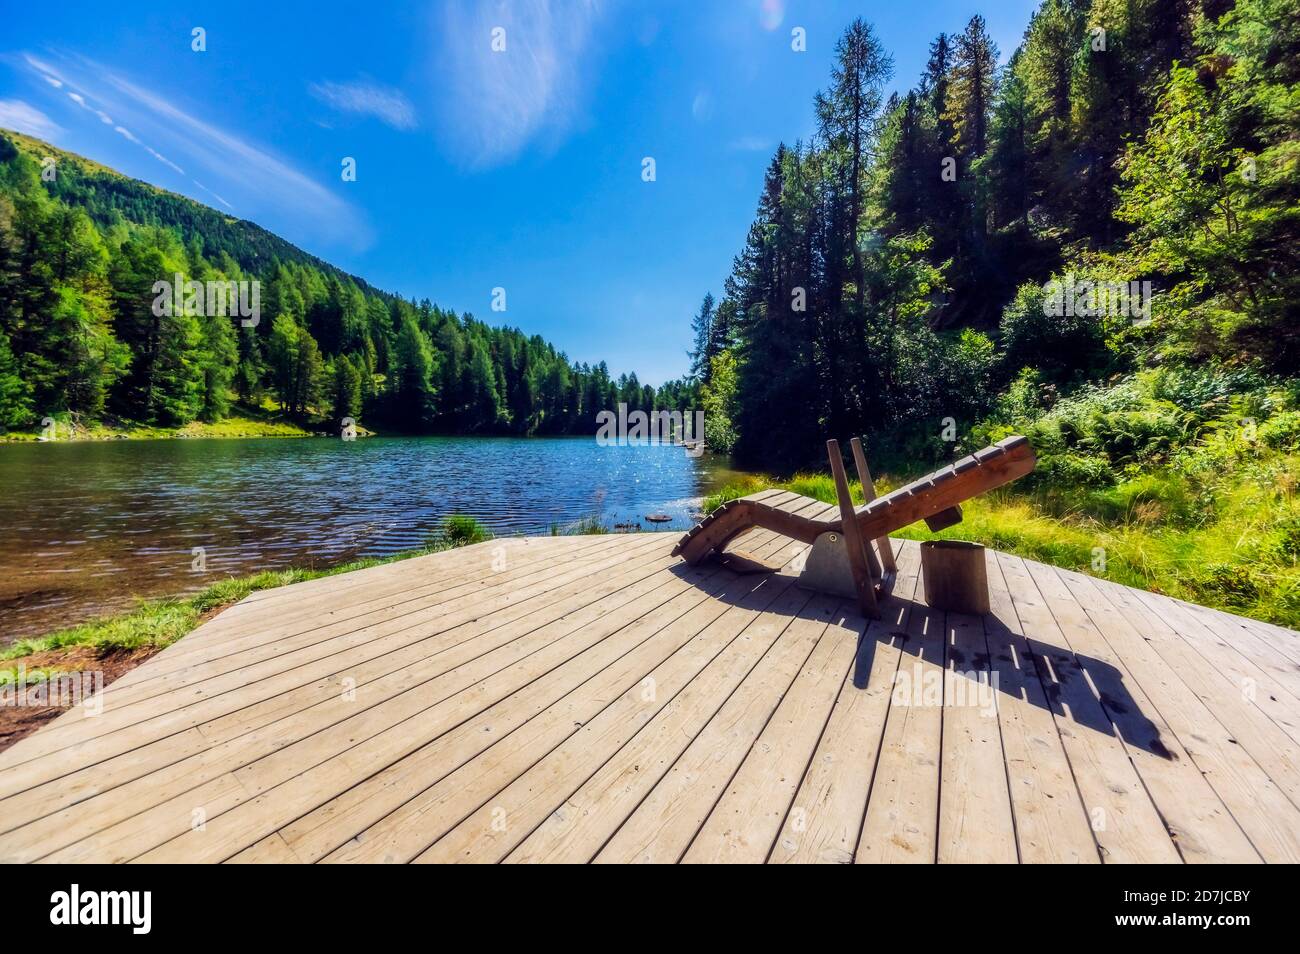 Deck chair on jetty by lake at Turracher Hoehe, Gurktal Alps, Austria Stock Photo